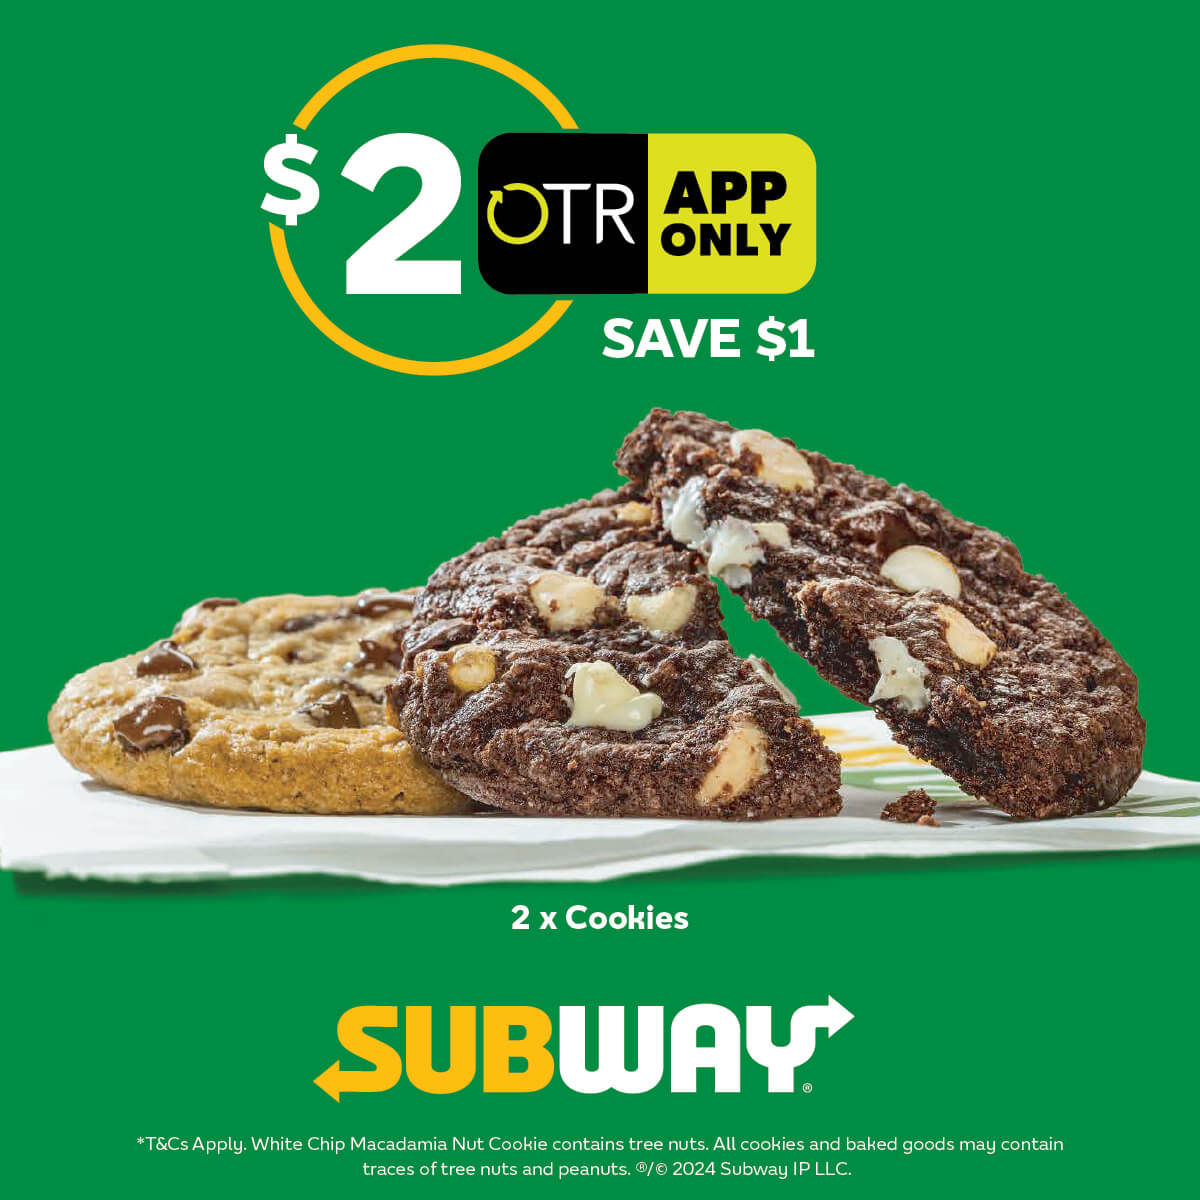 Subway Cookies, 2 for $2